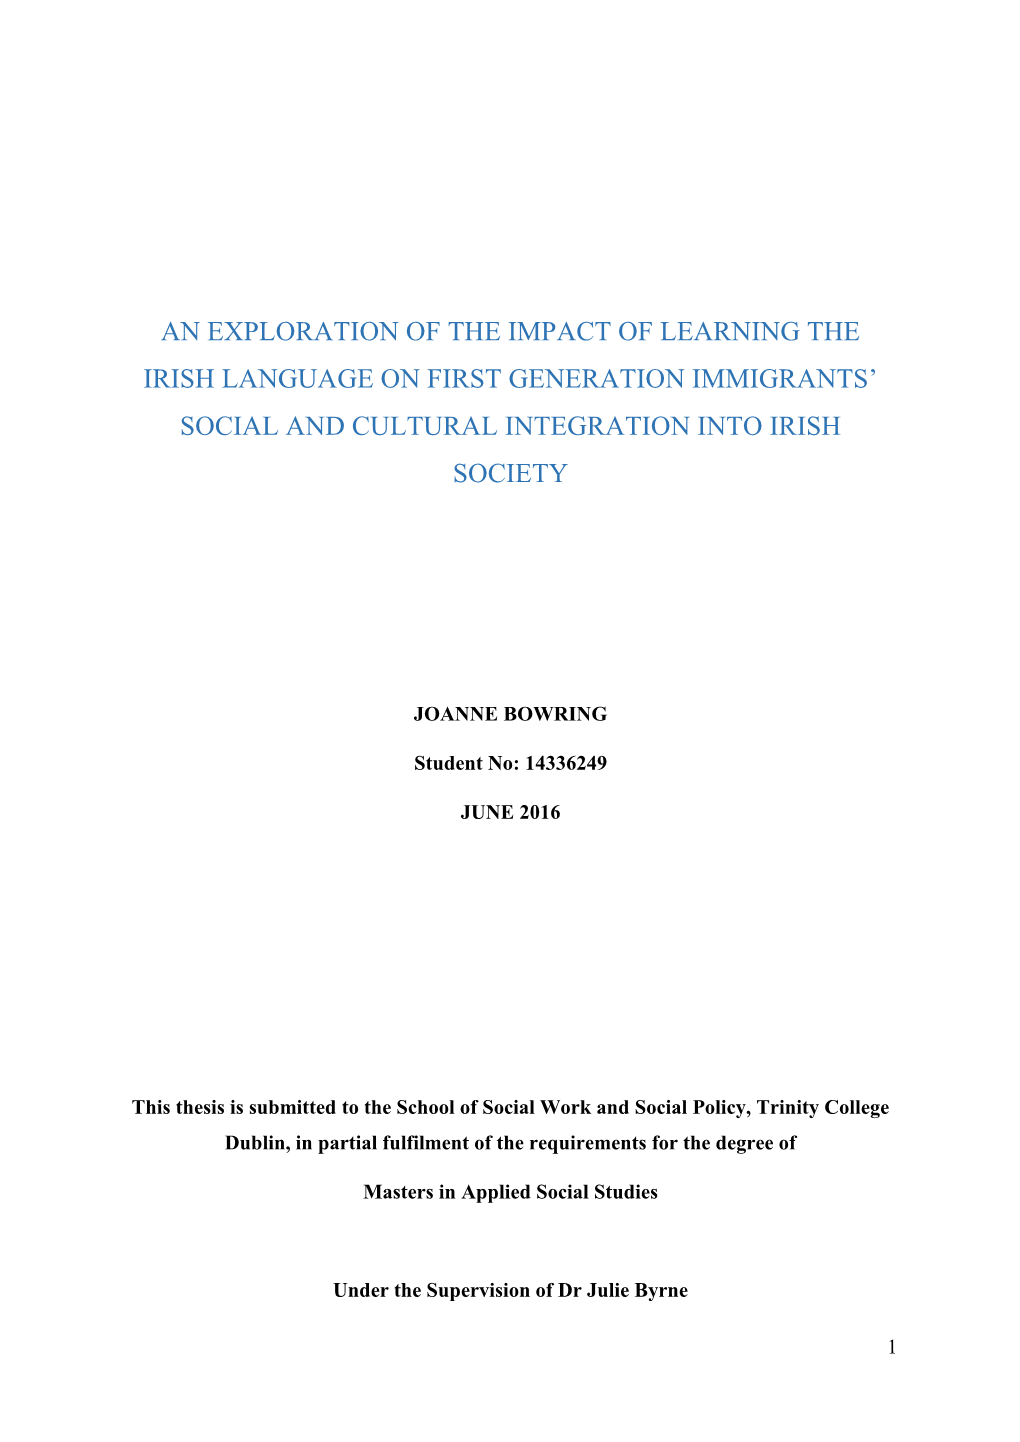 An Exploration of the Impact of Learning the Irish Language on First Generation Immigrants’ Social and Cultural Integration Into Irish Society